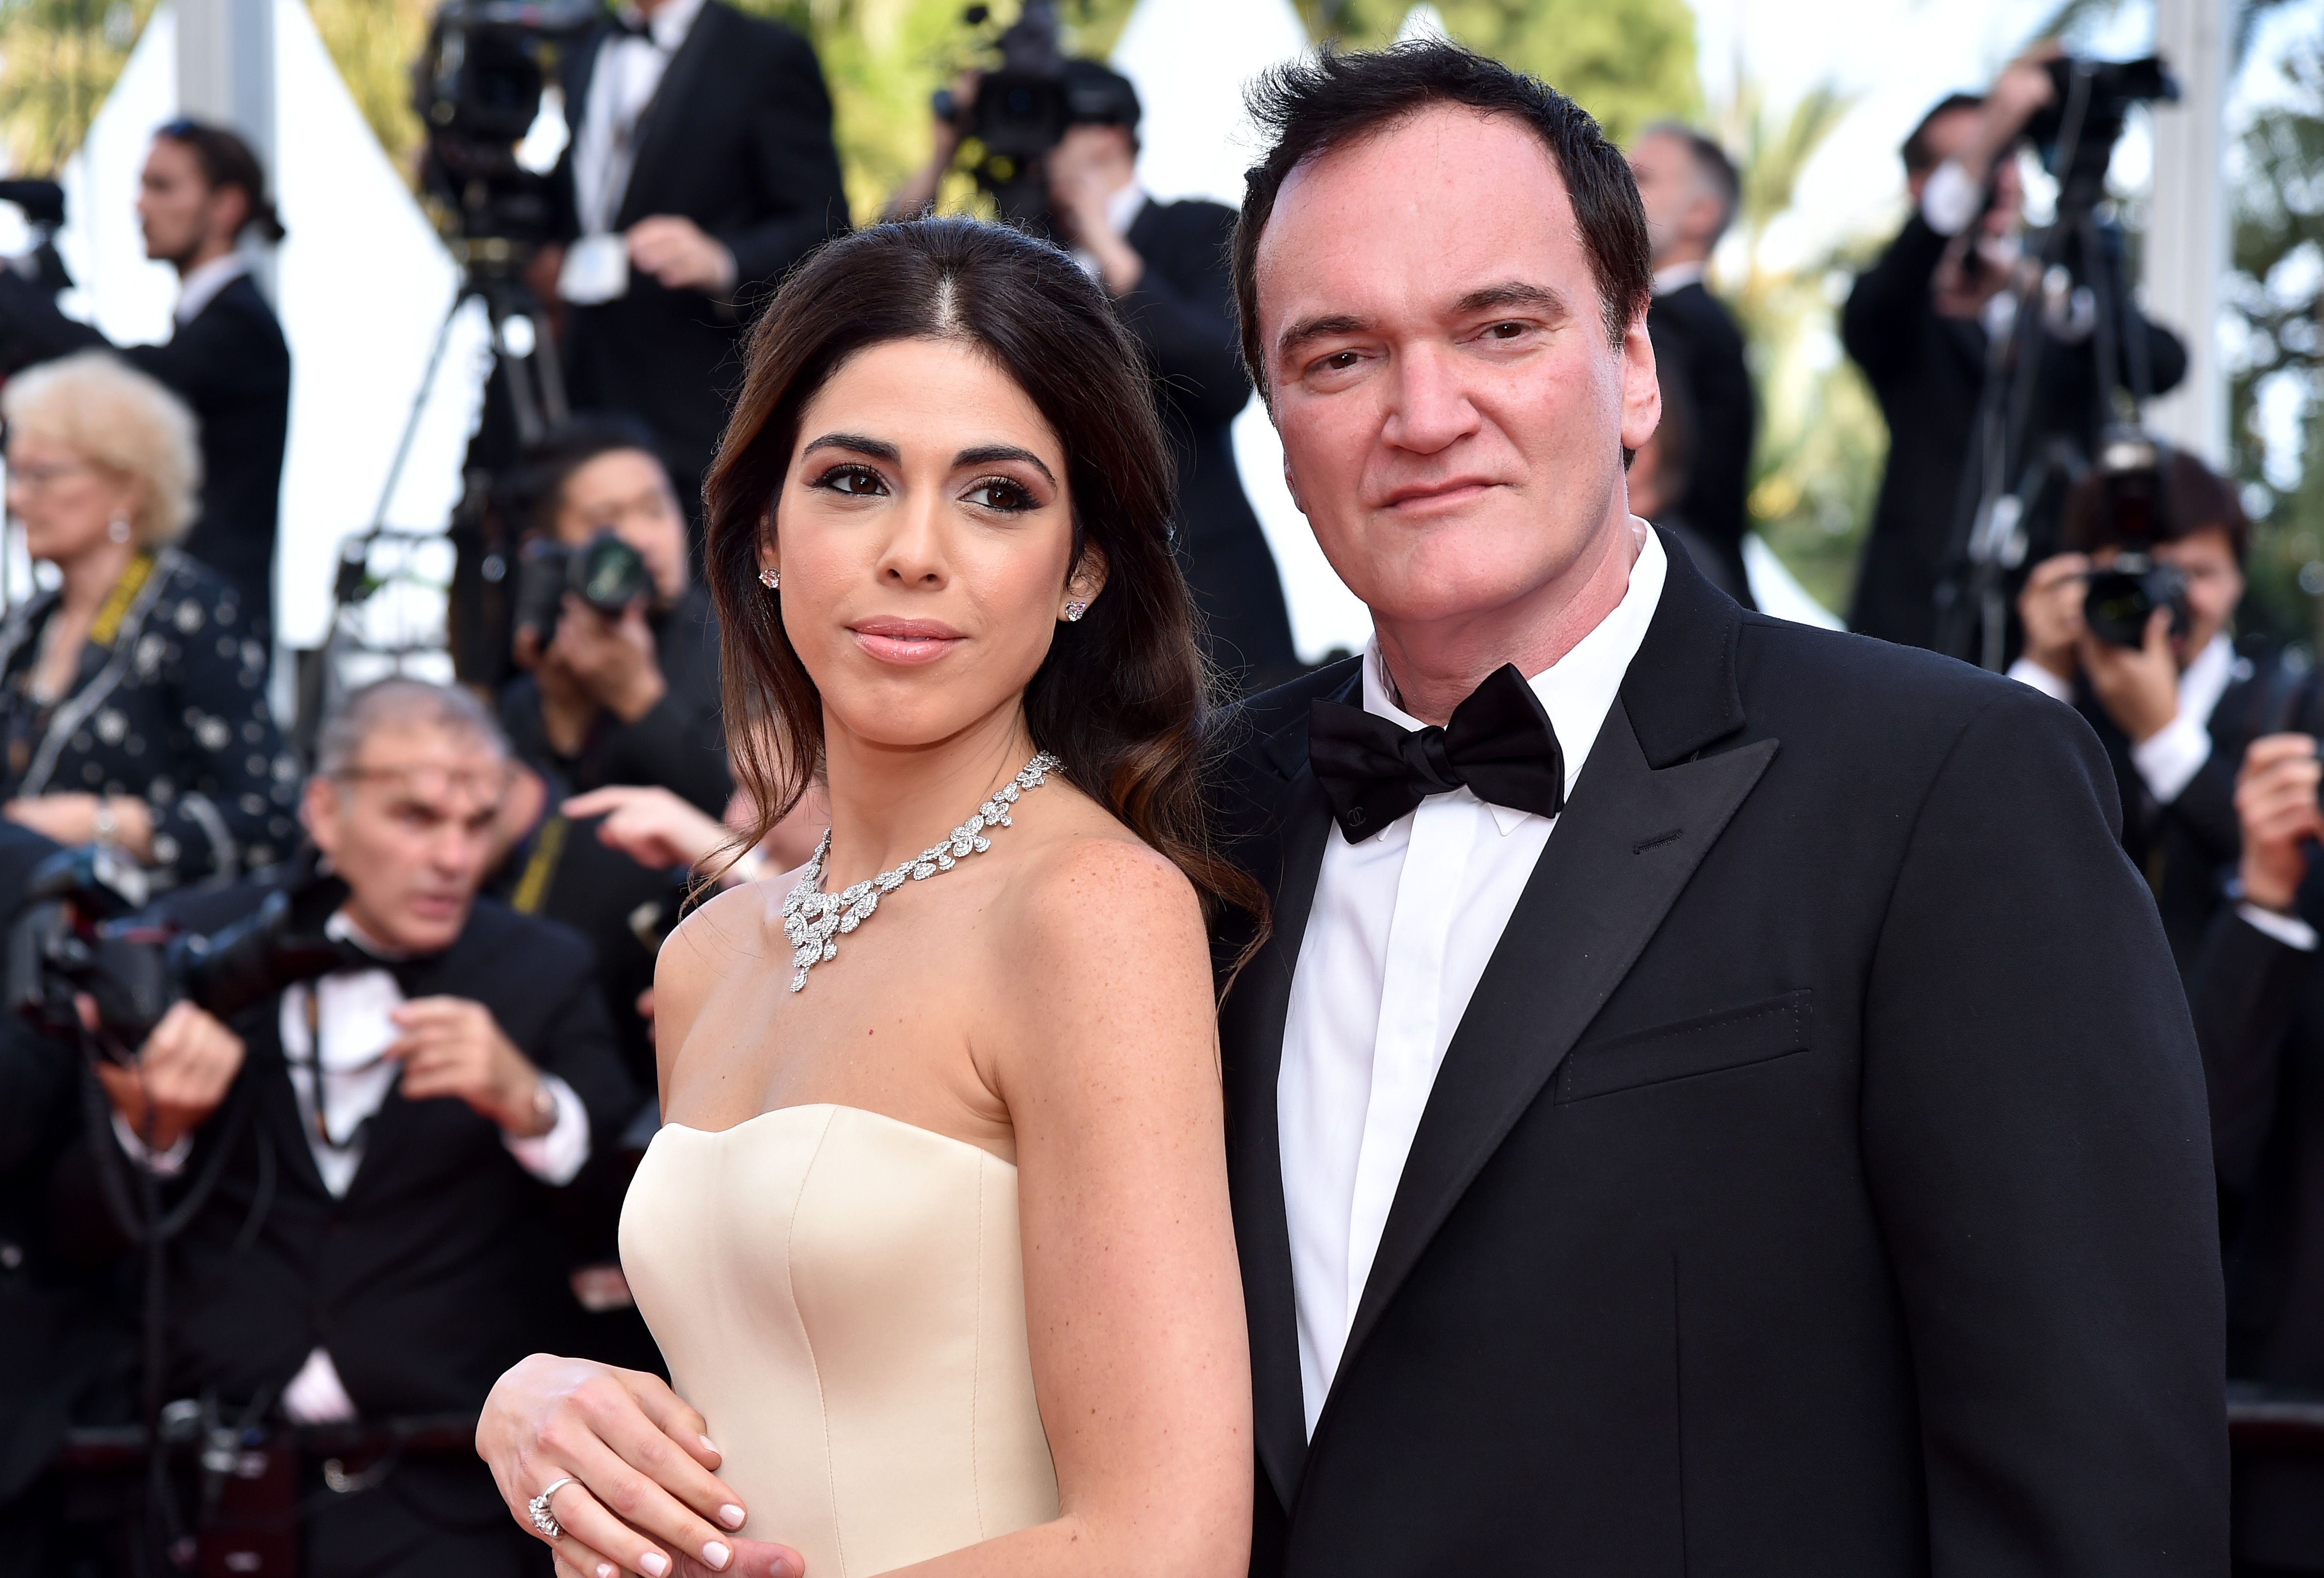  Quentin Tarantino and Daniella Tarantino at the 72nd annual Cannes Film Festival in 2019 in Cannes, France | Source: Getty Images